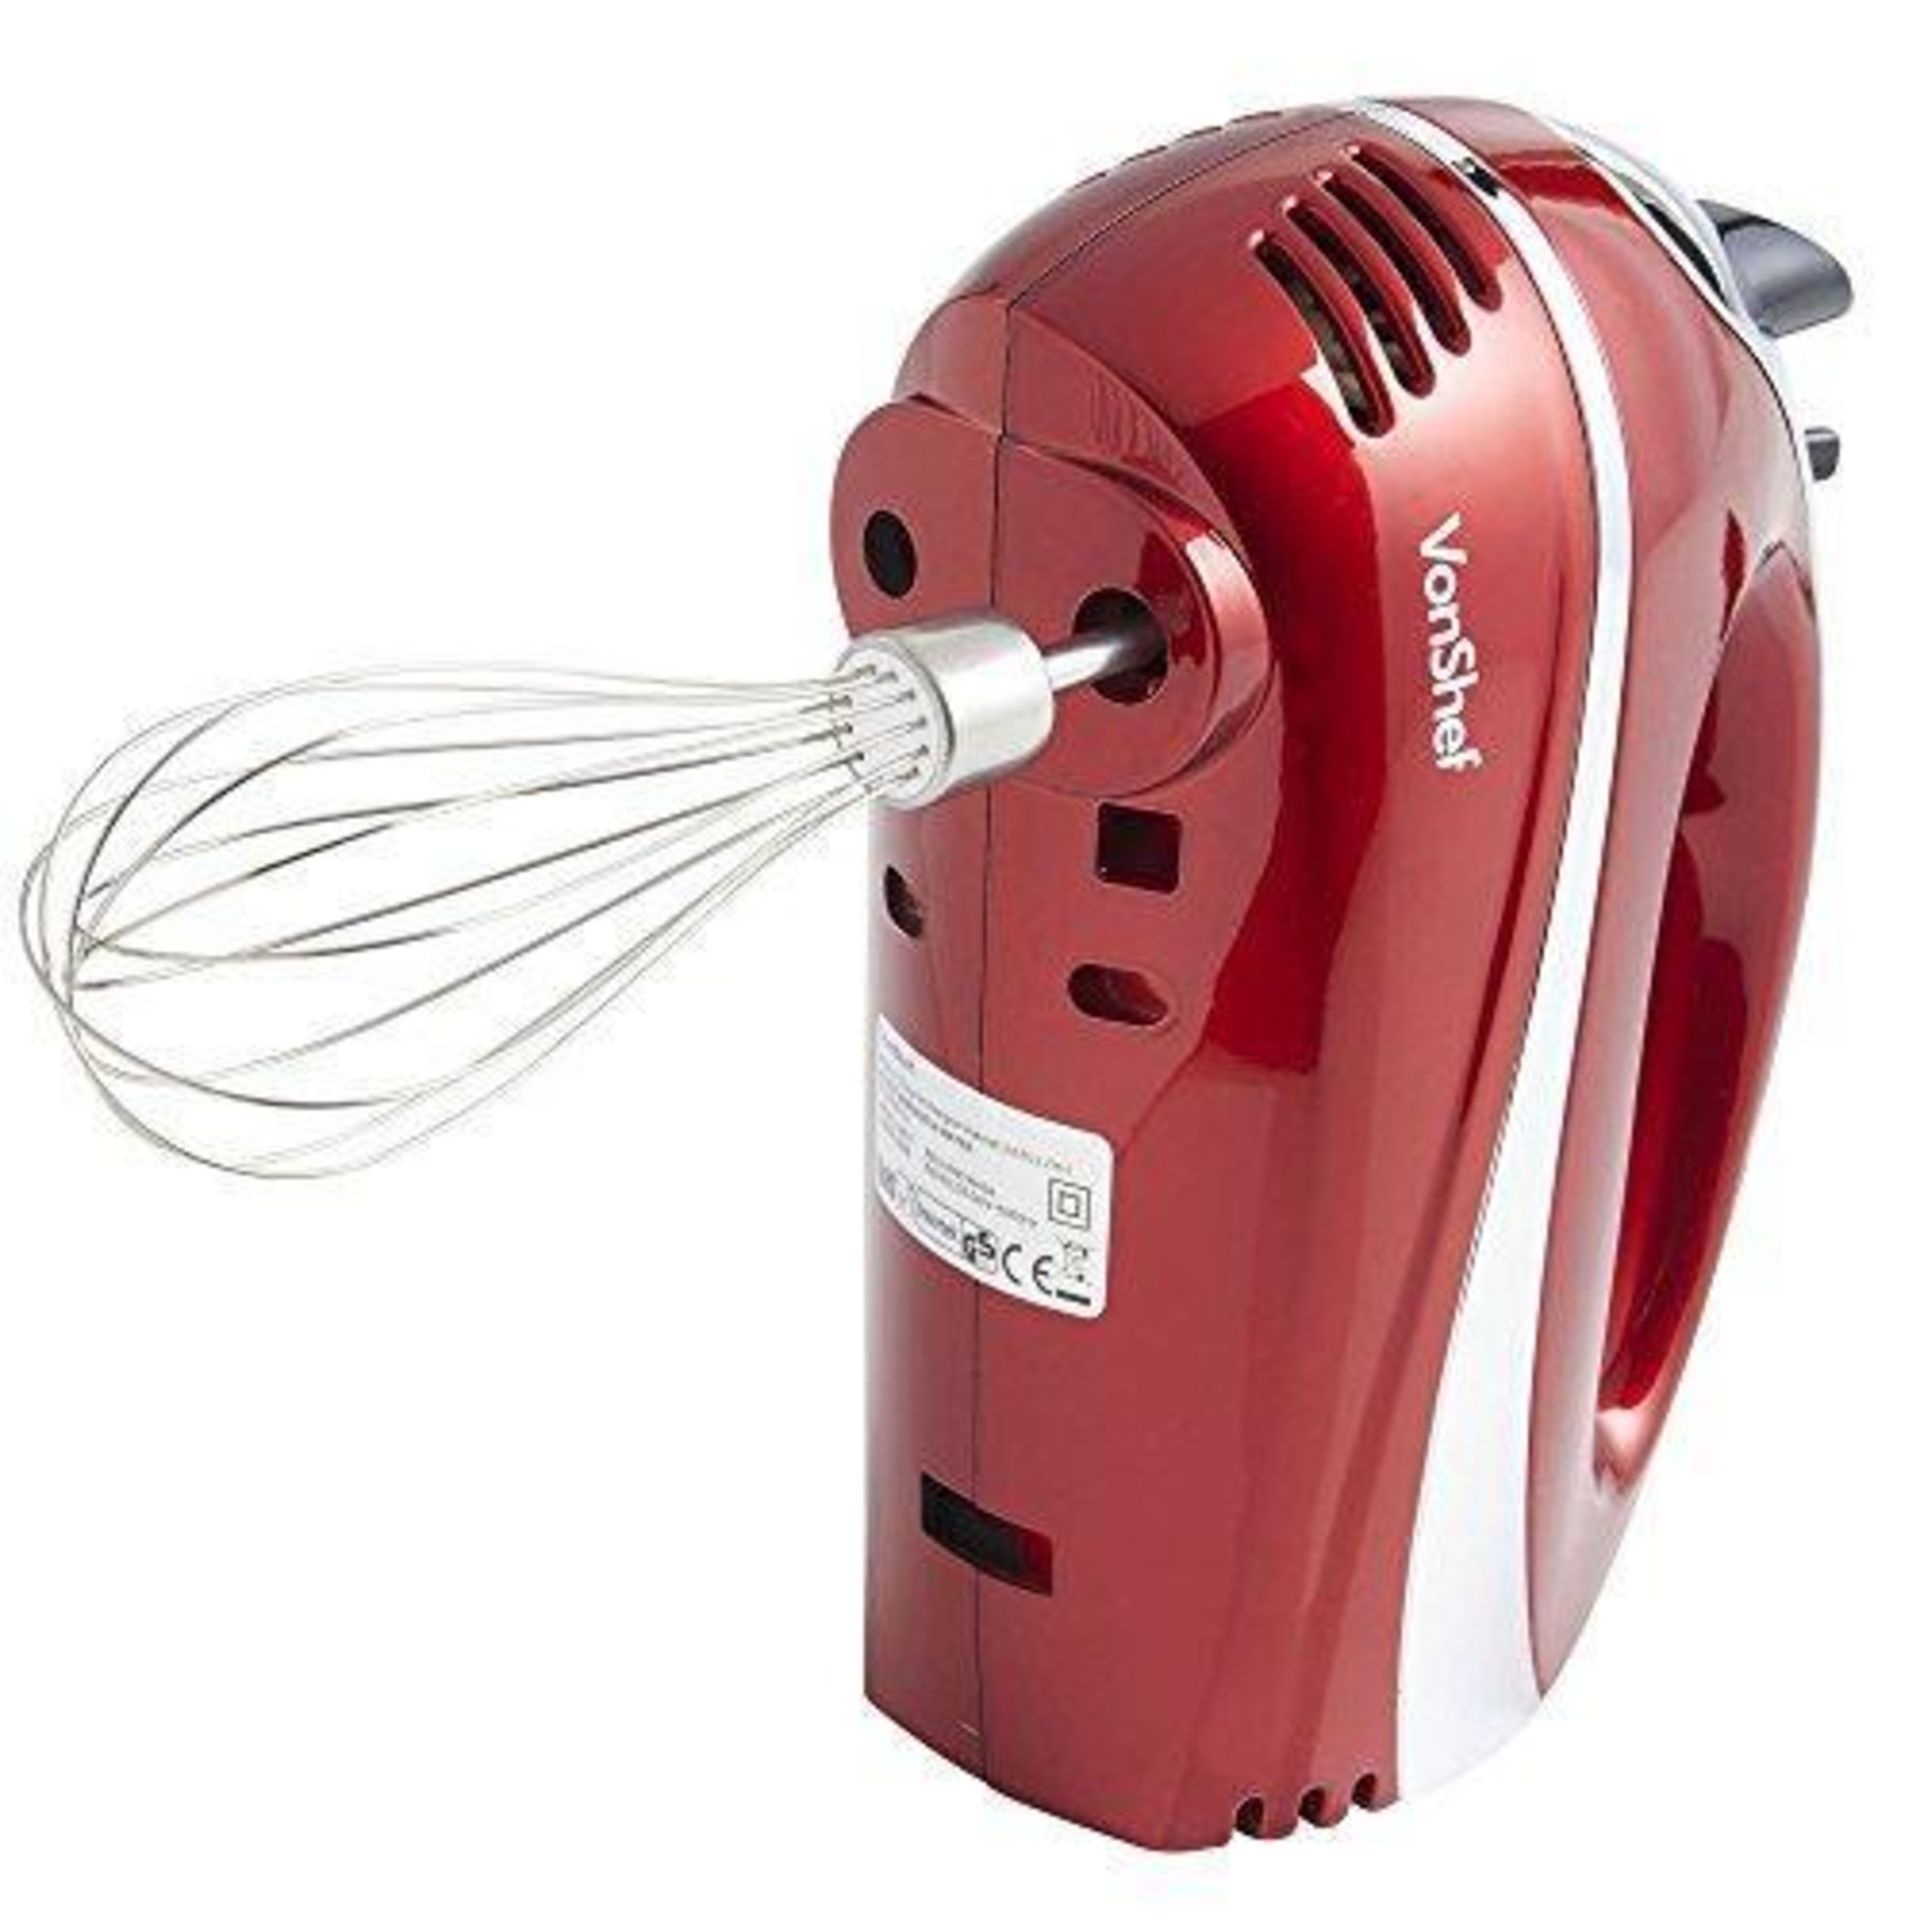 300W Red Hand Mixer - ER51. VonShef Red Hand WhiskThis is the ultimate kitchen appliance if you love - Image 3 of 4